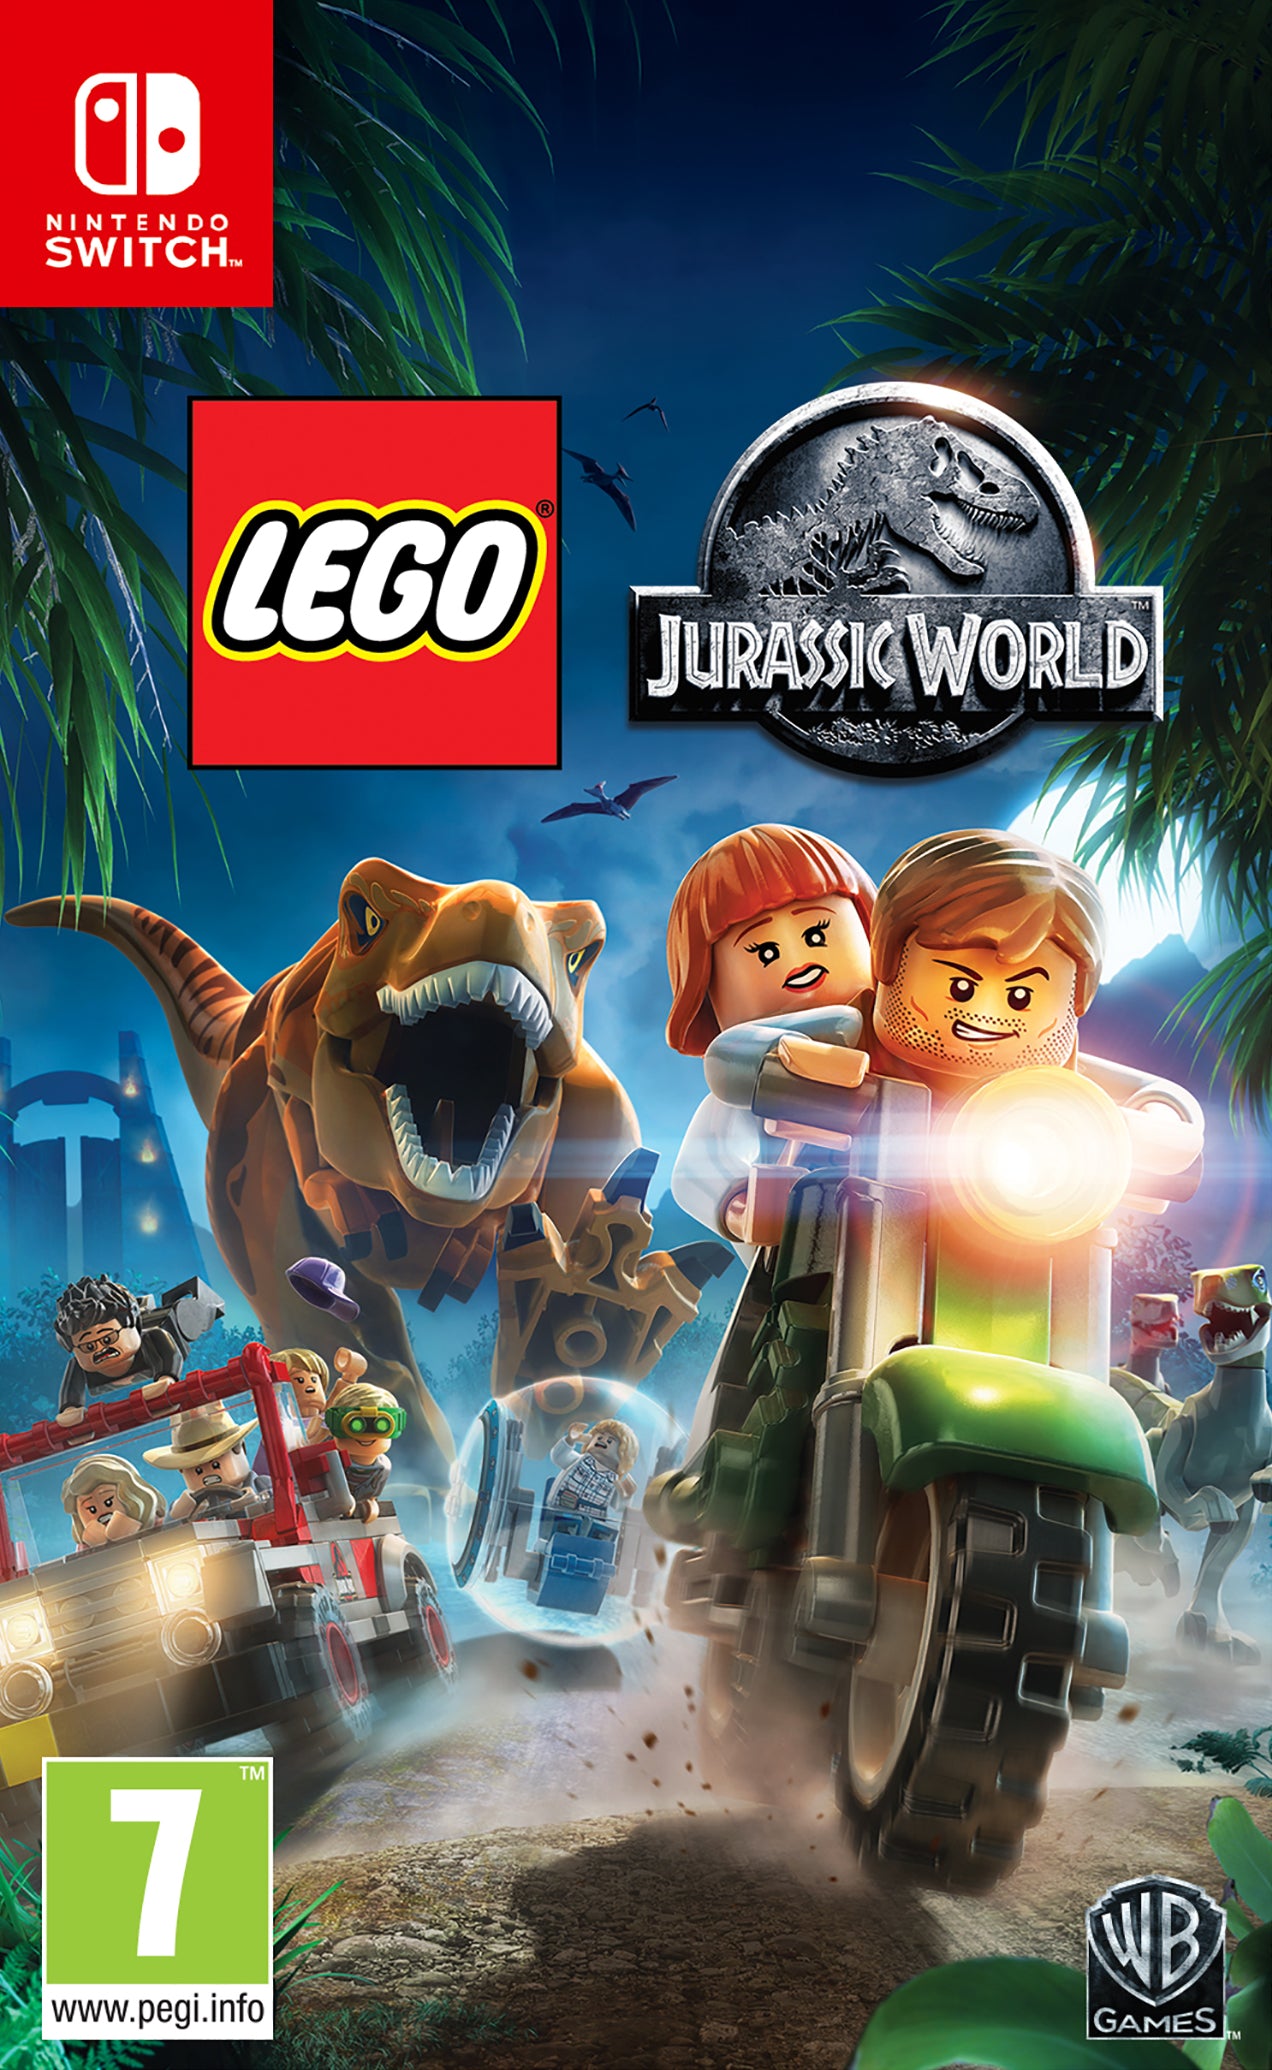 Image of Lego Jurassic World Video Game for Nintendo Switch